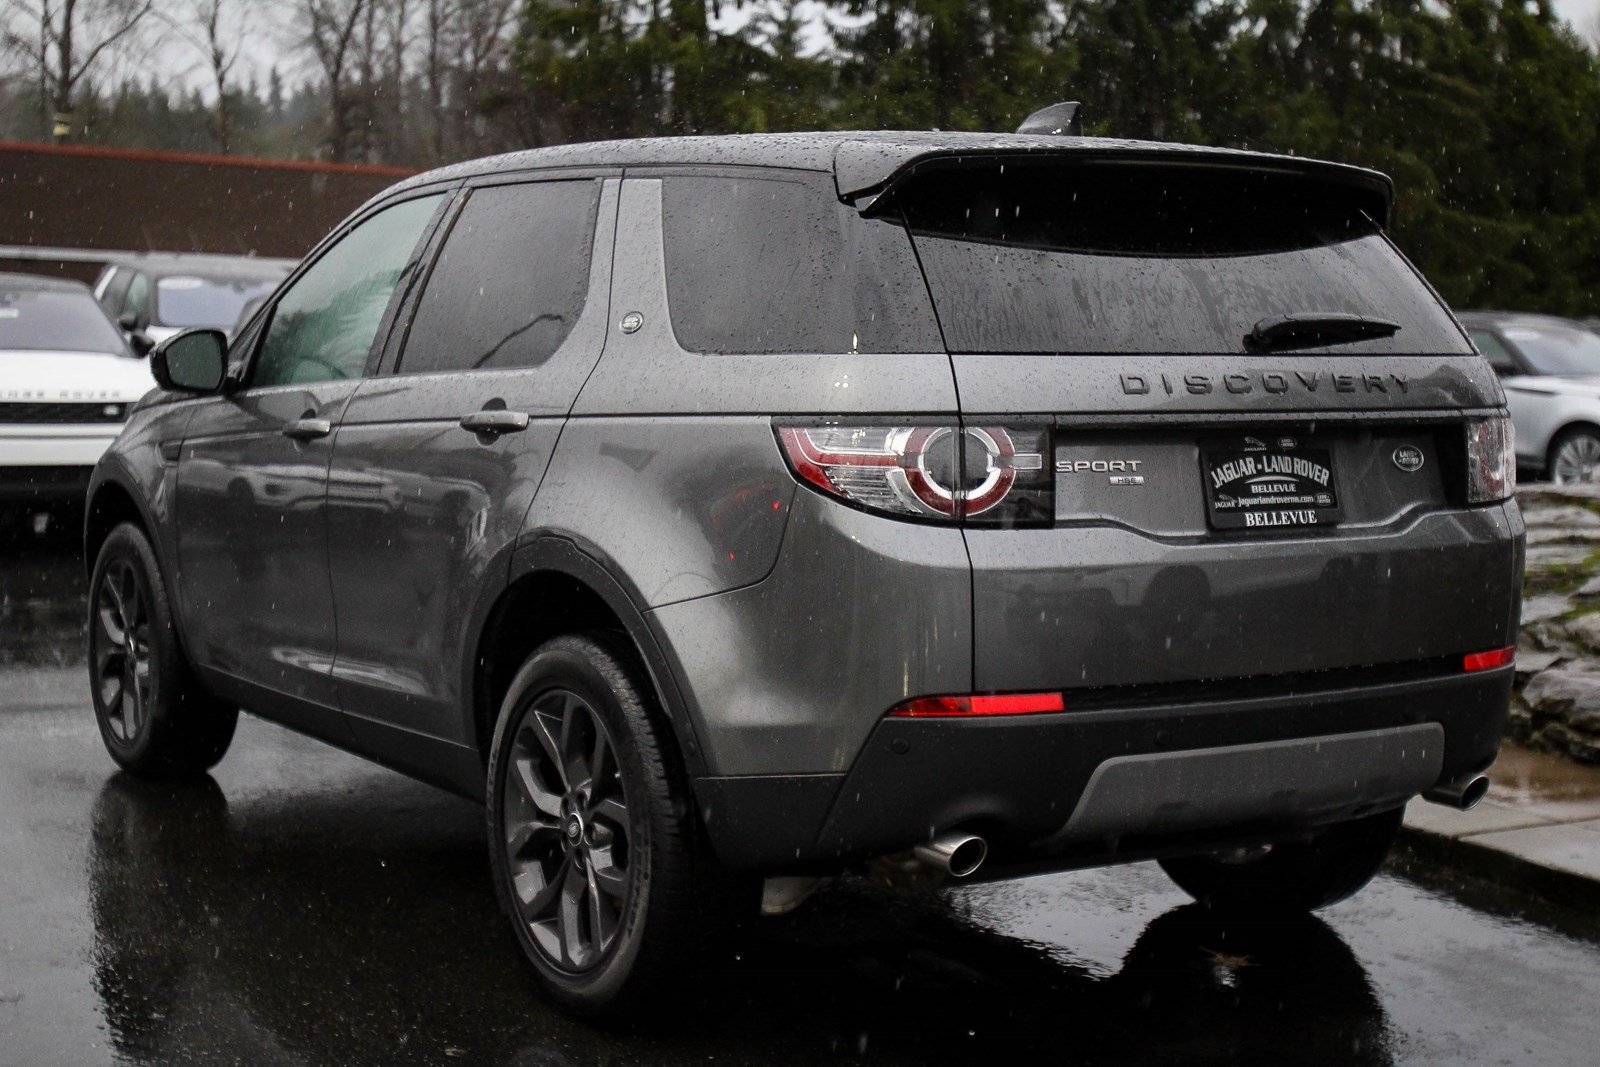 PreOwned 2019 Land Rover Discovery Sport Landmark Sport